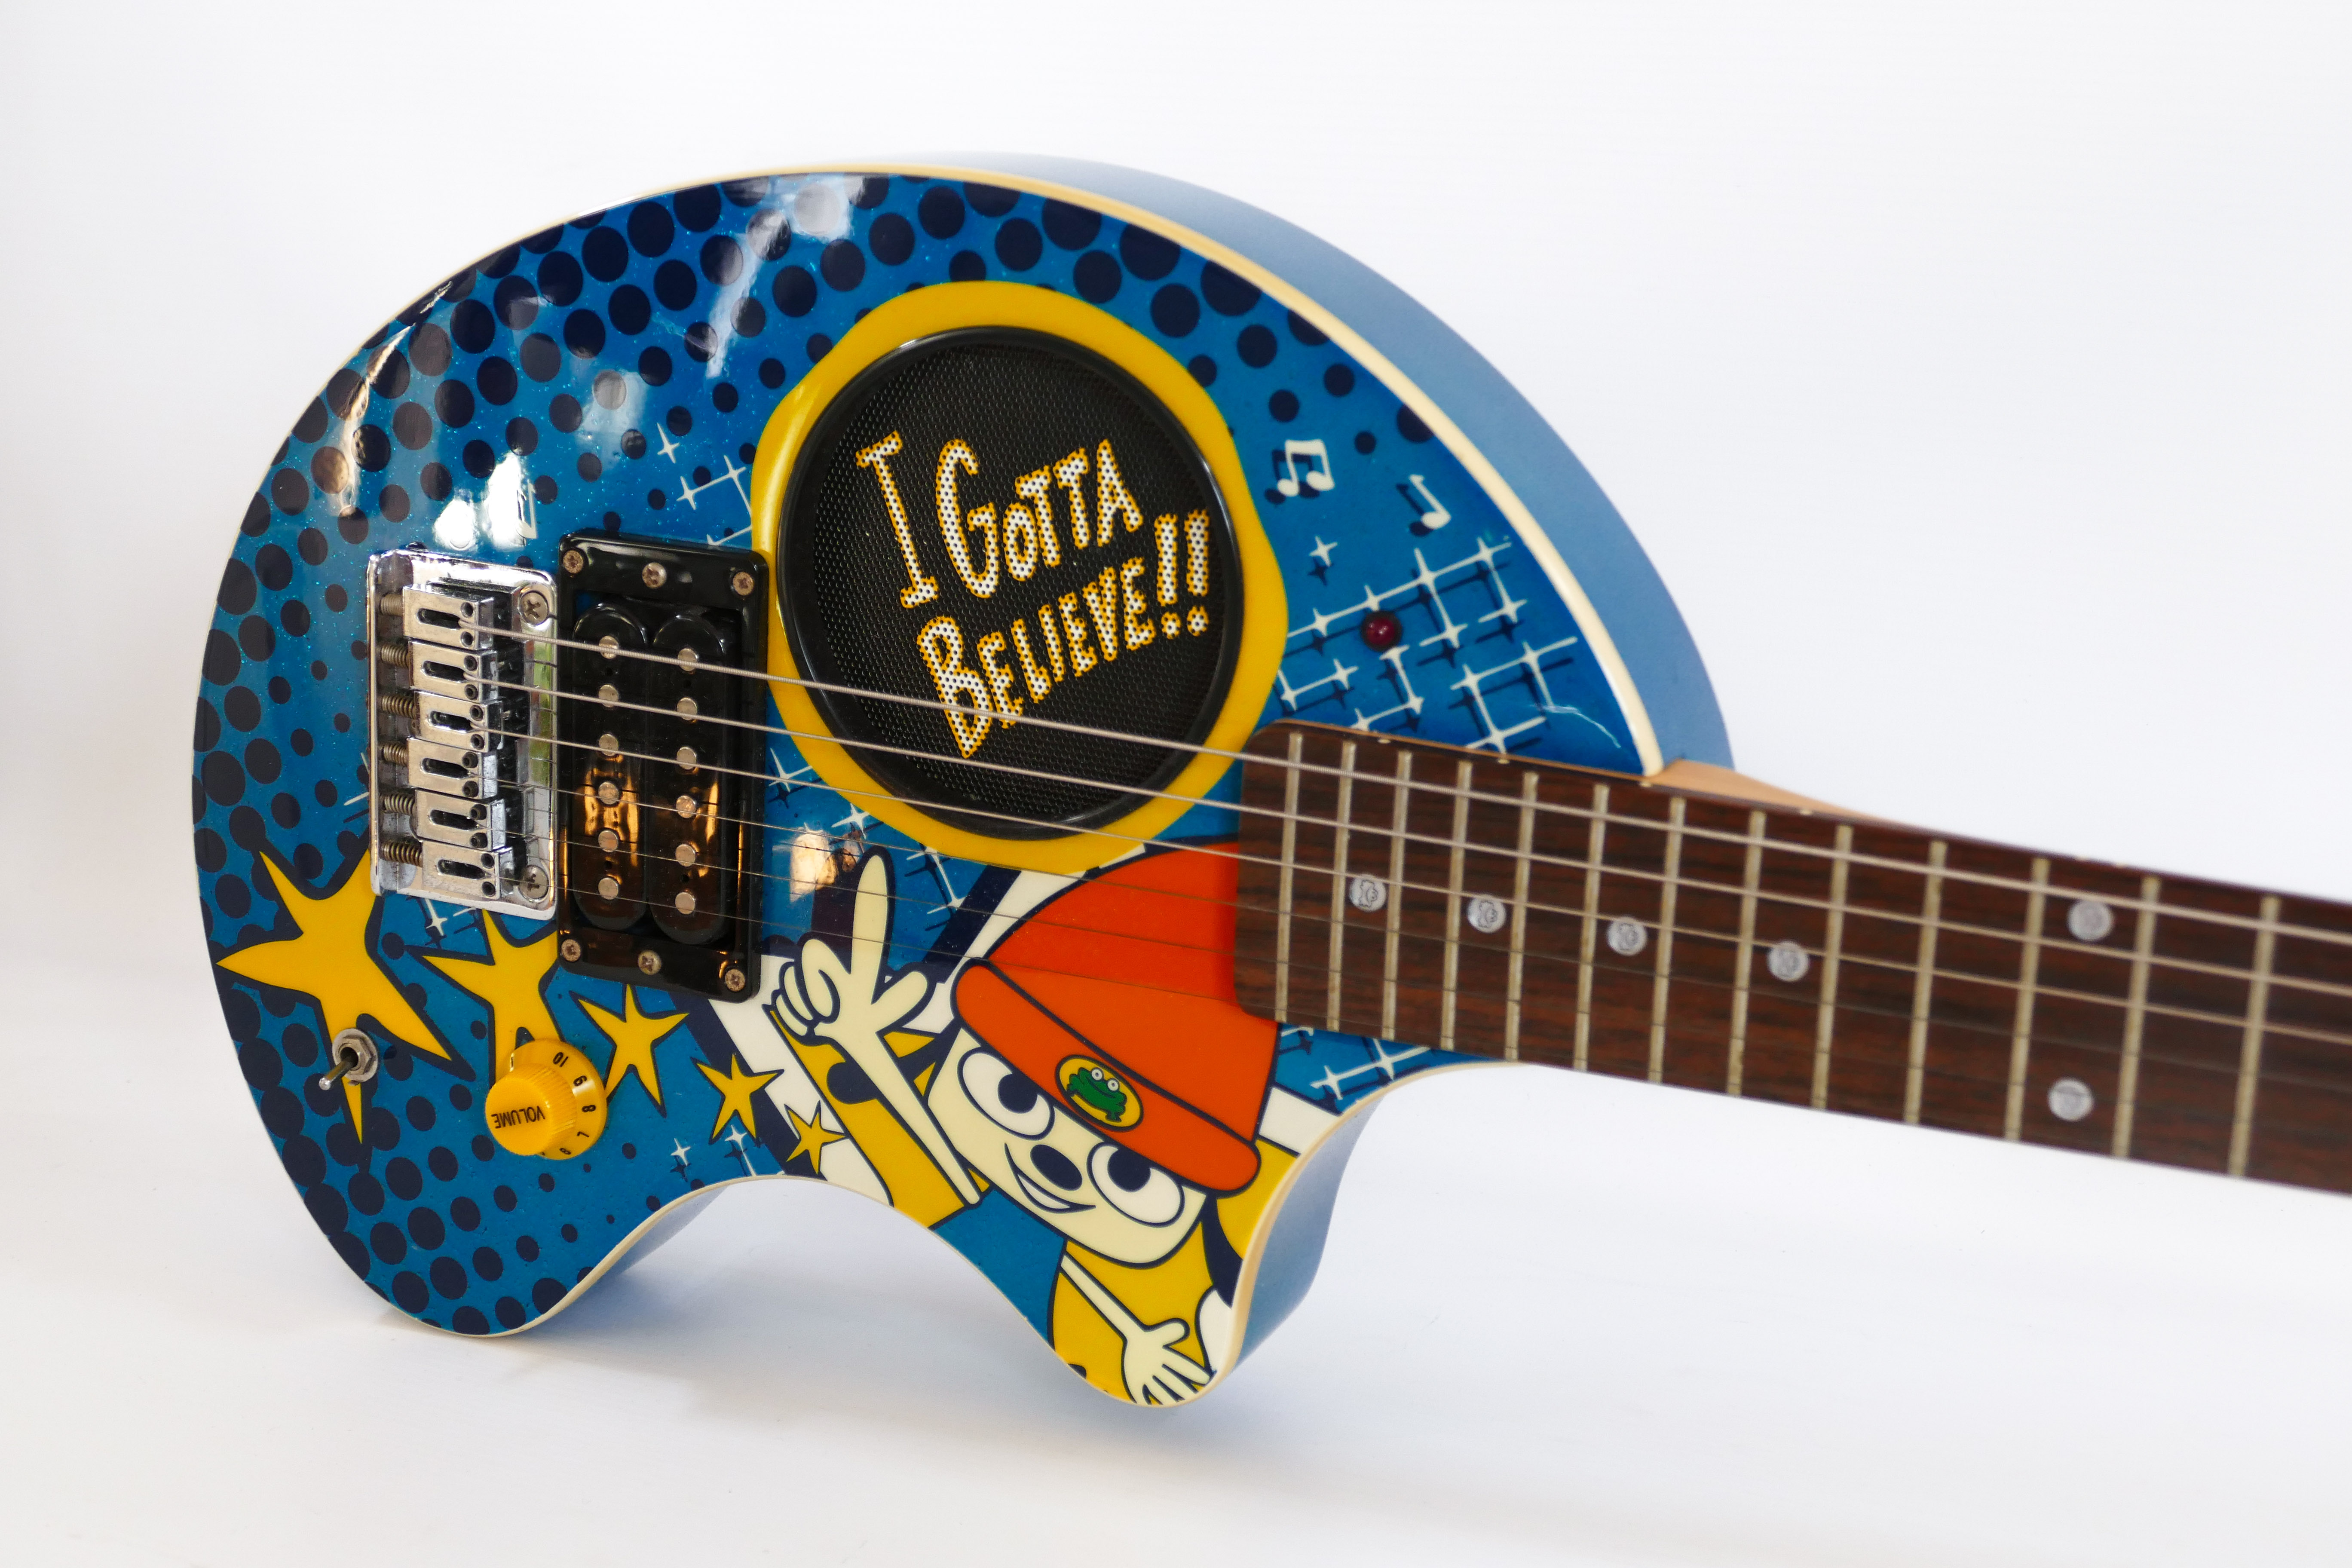 PARAPPA THE RAPPER ELECTRIC GUITAR FERNANDES PLAYSTATION PS1 VIDEO GAME MERCHANDISE VACUUM RECORDS - Image 3 of 4